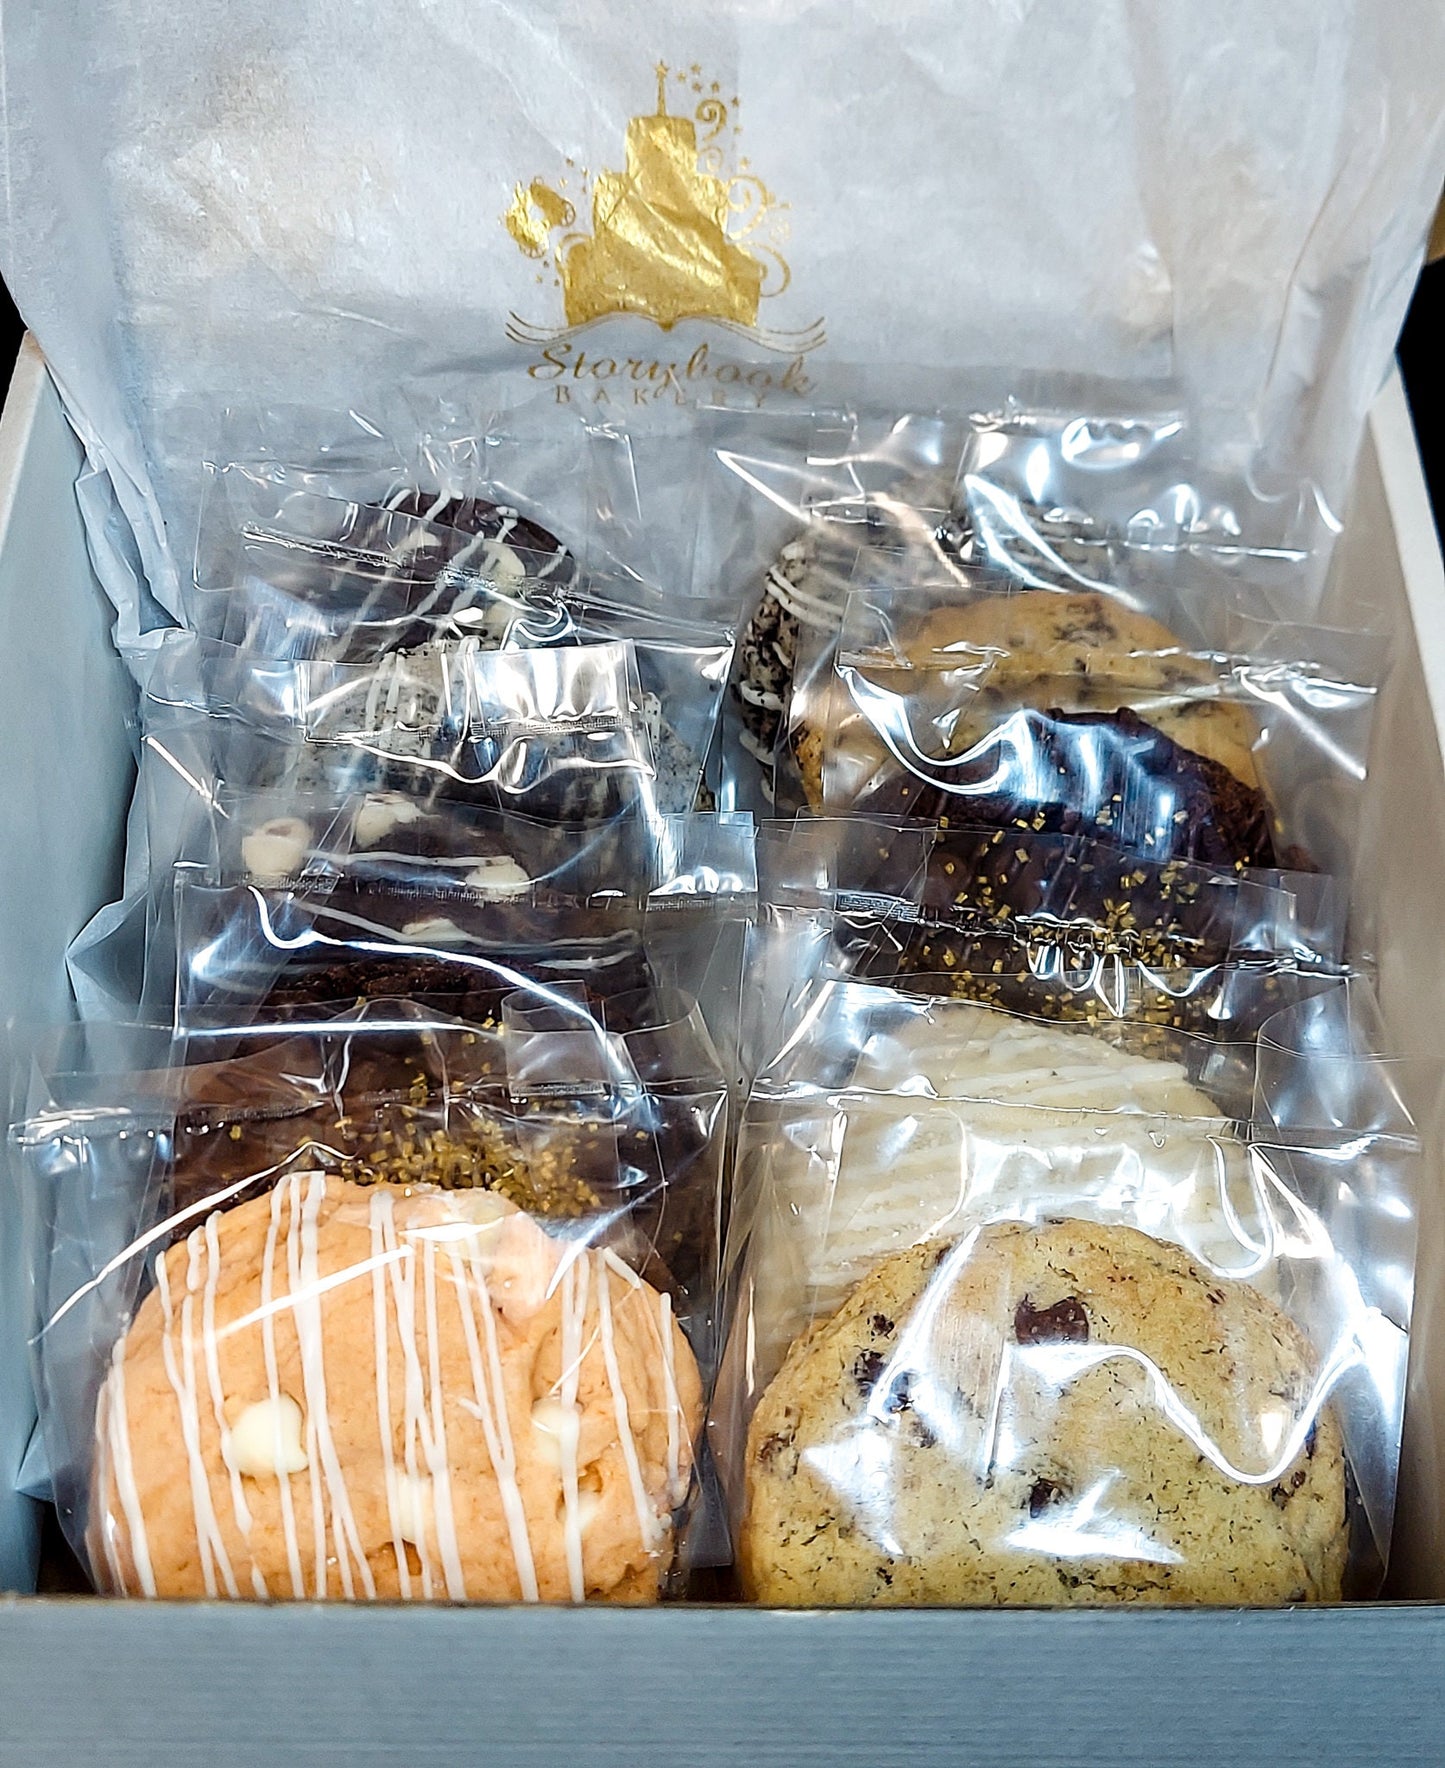 Cookie Gift Box - 1 Dz Cookies (3 Boxes)